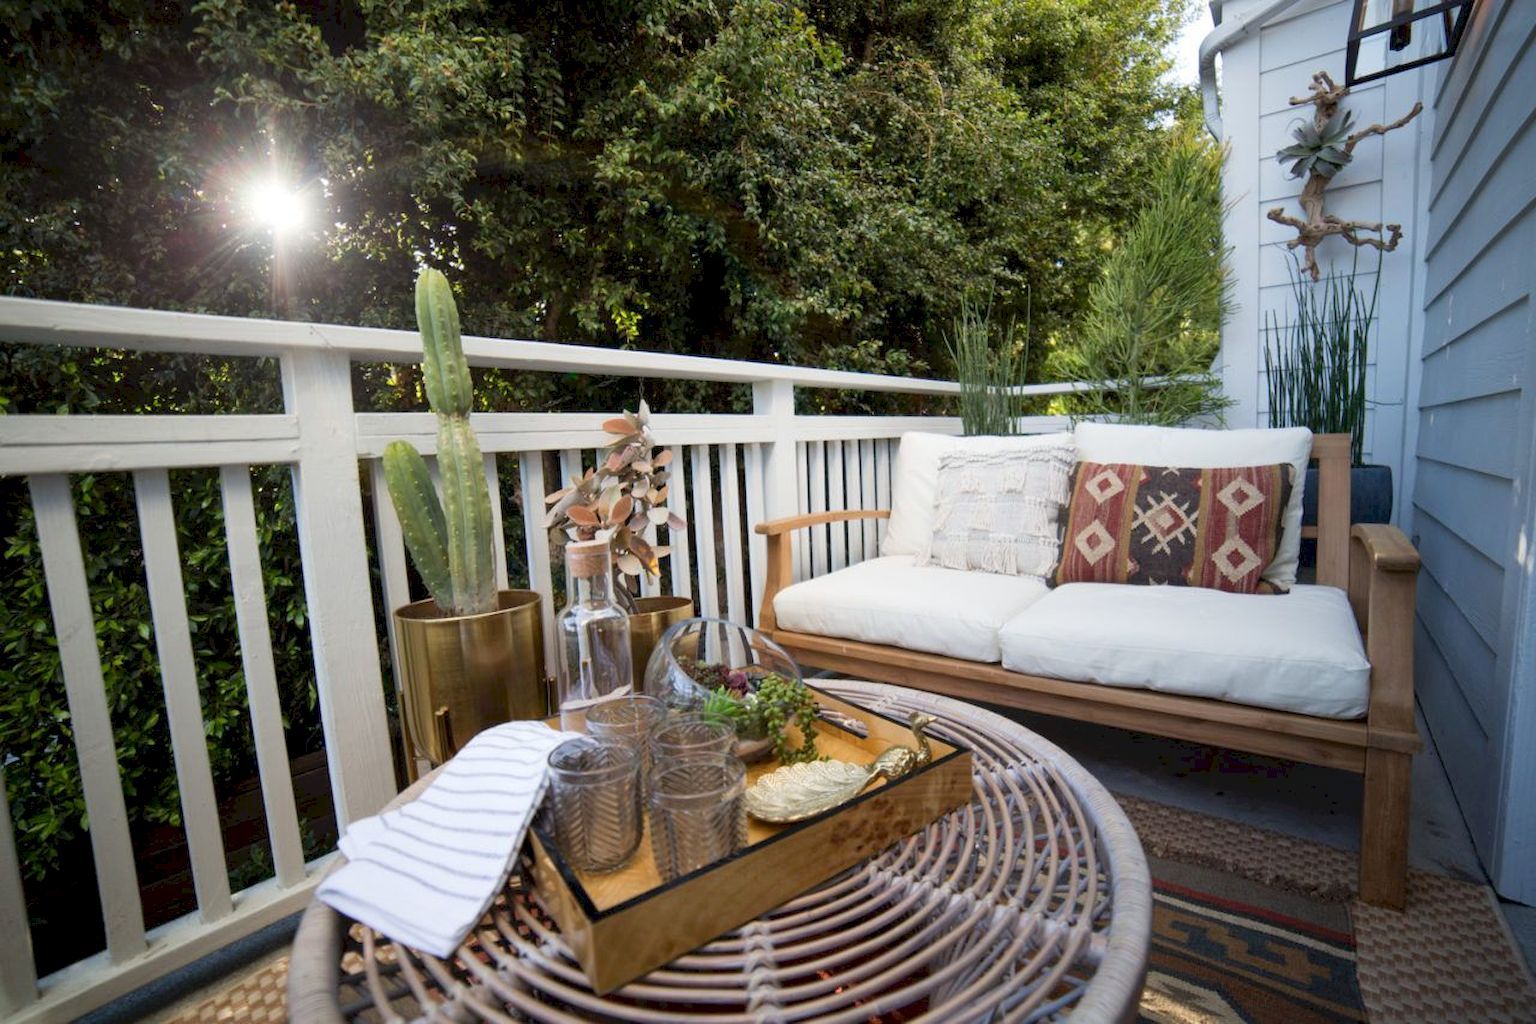 Creating A Stylish Outdoor Oasis With The Right Furniture